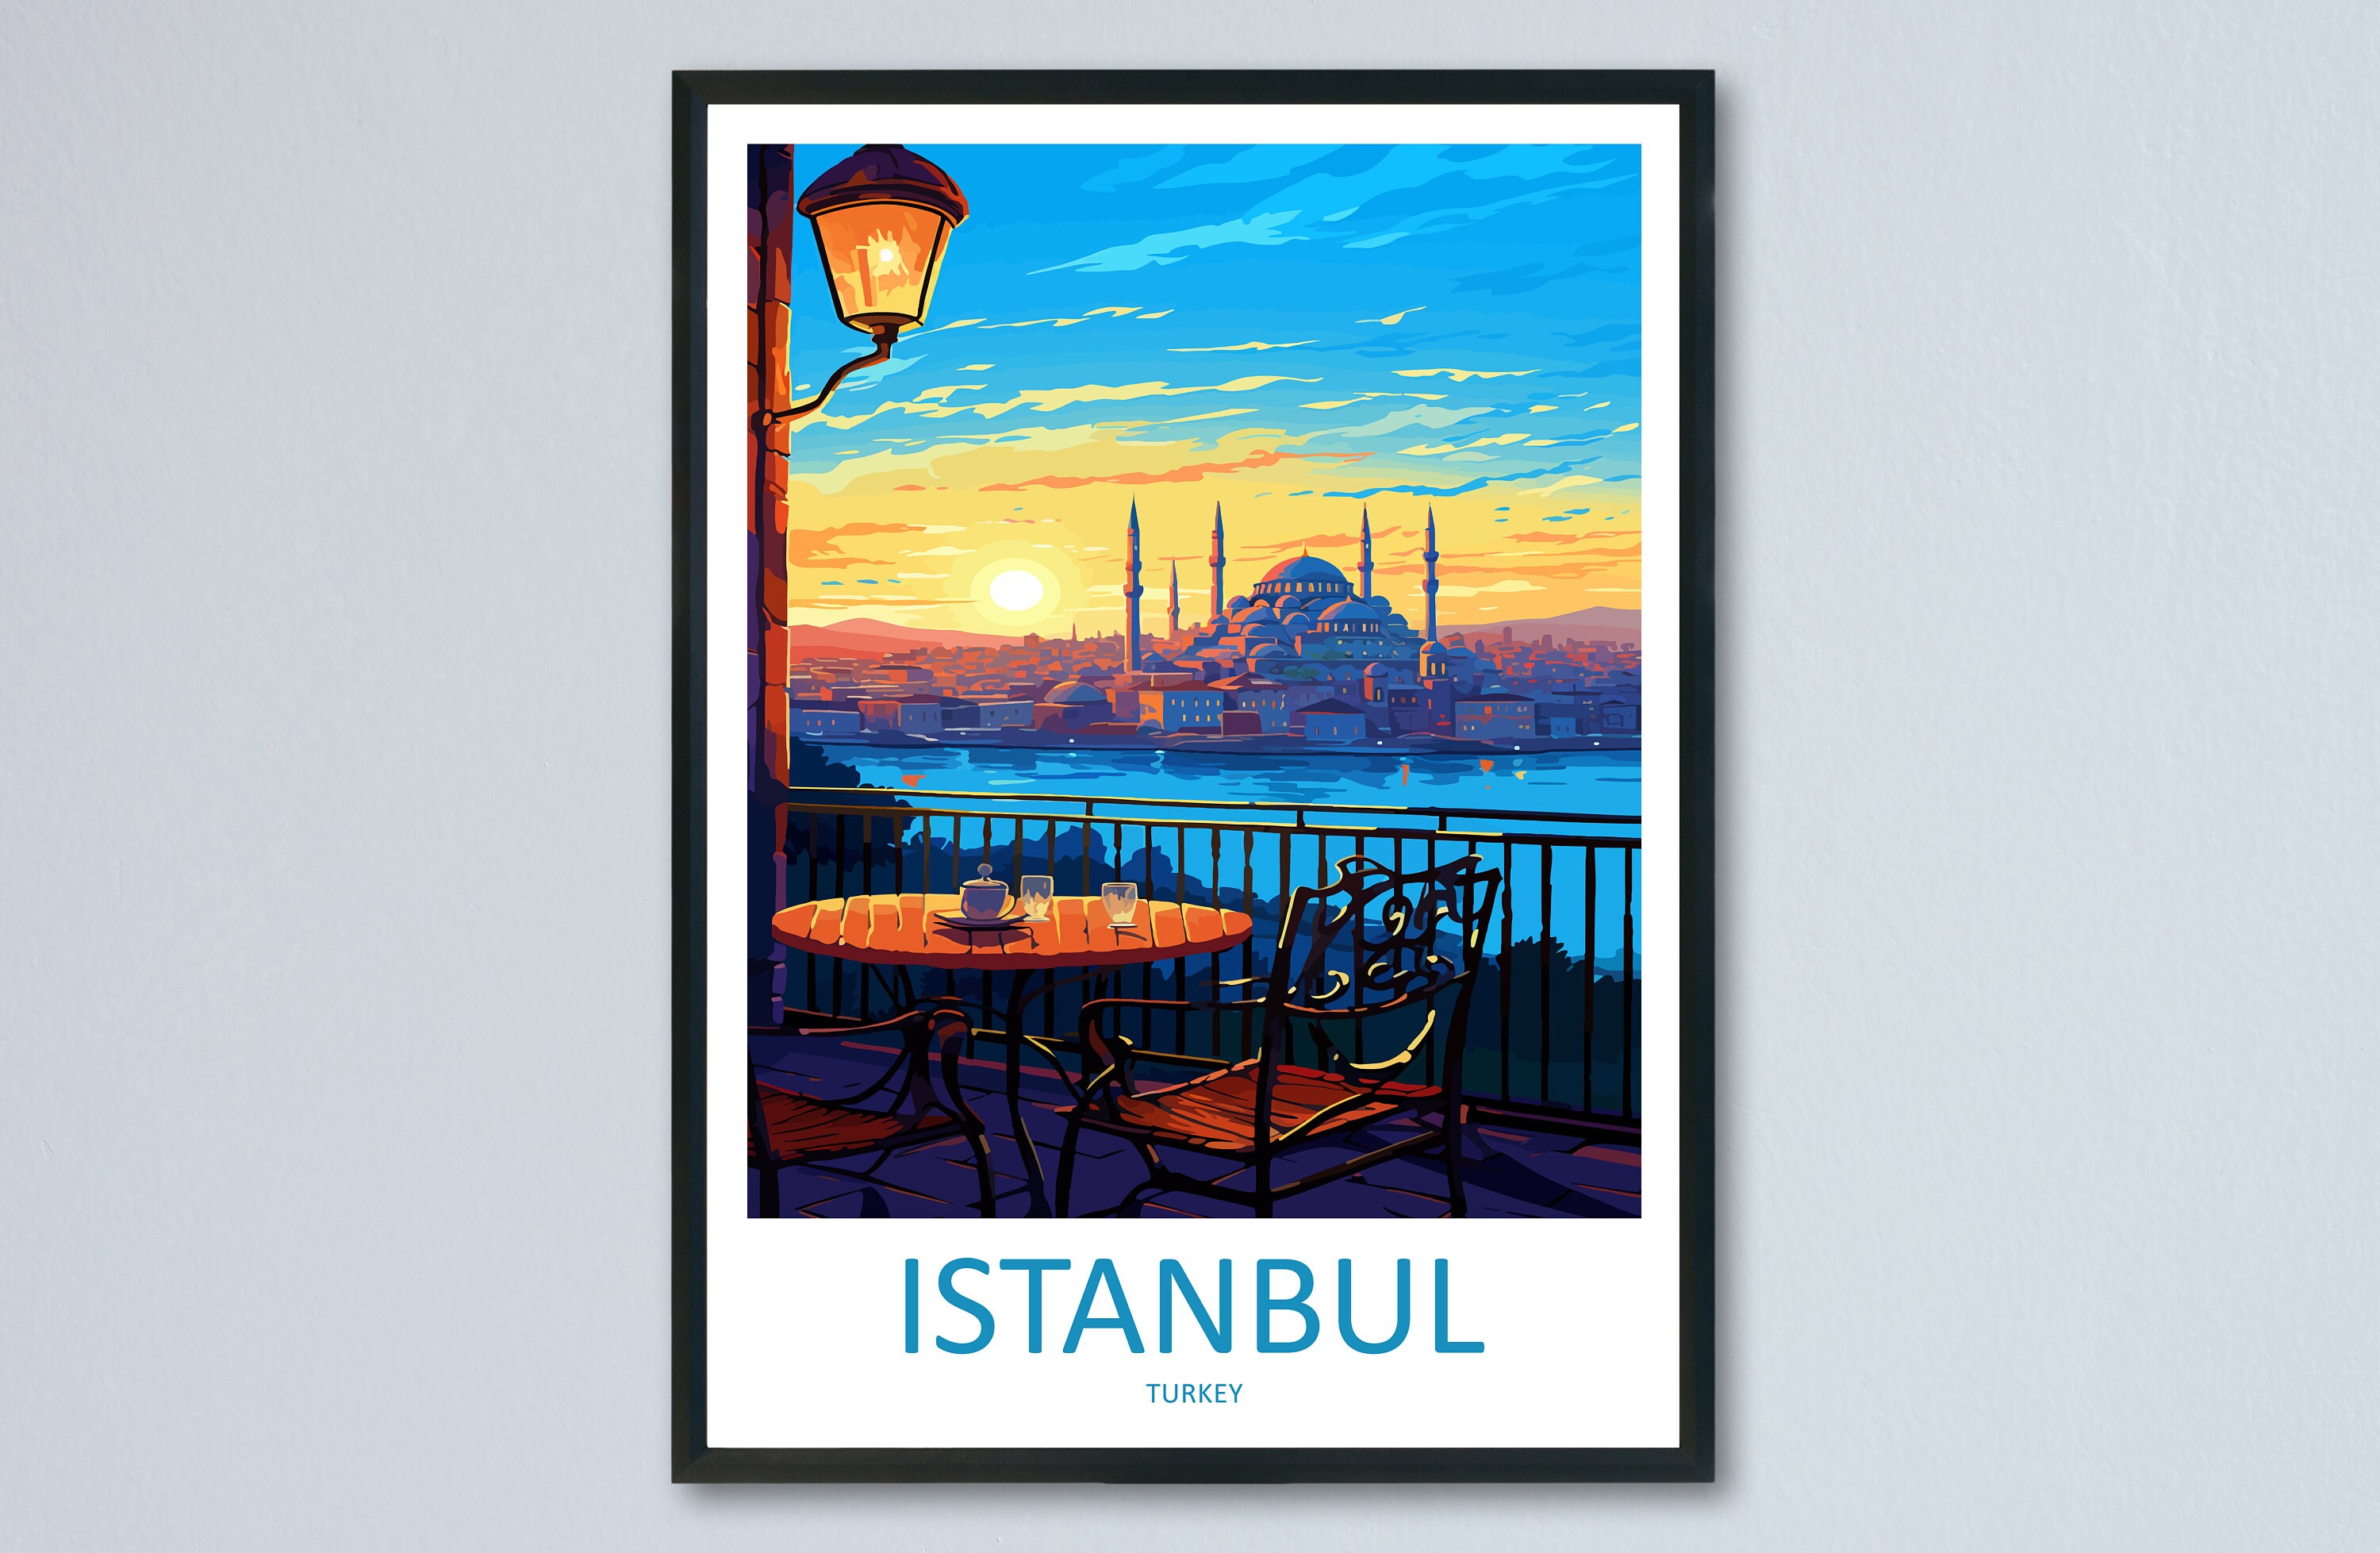 City Guide Istanbul, English Version - Art of Living - Books and Stationery